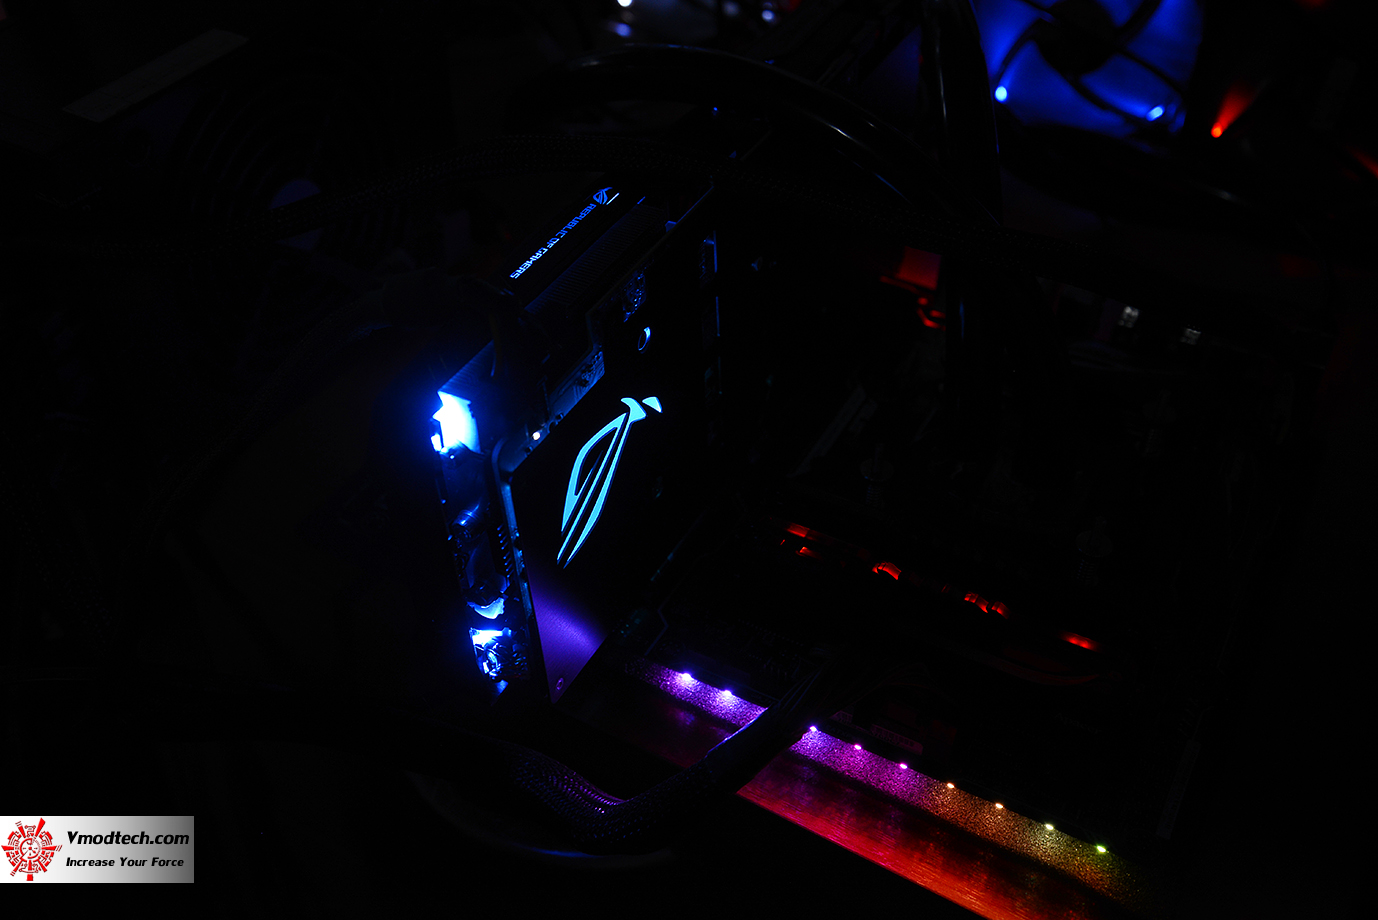 dsc 3190 ASUS Z170 PRO GAMING/AURA REVIEW